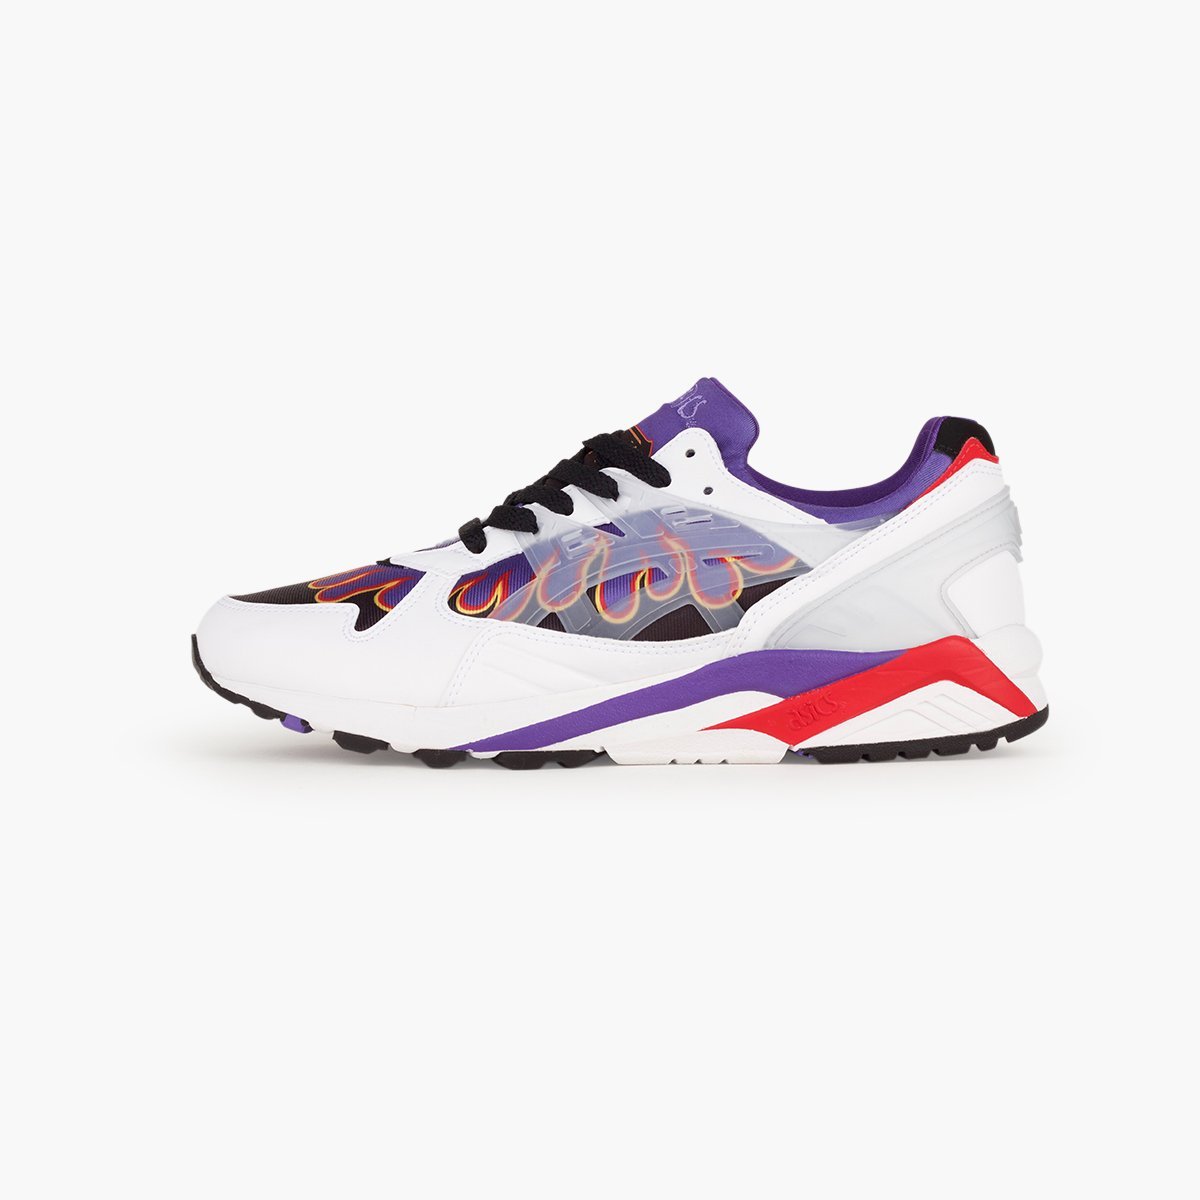 Asics Gel Kayano Trainer x Sneakerswolf-1193A164-100-White-7.5 us-SUEDE Store